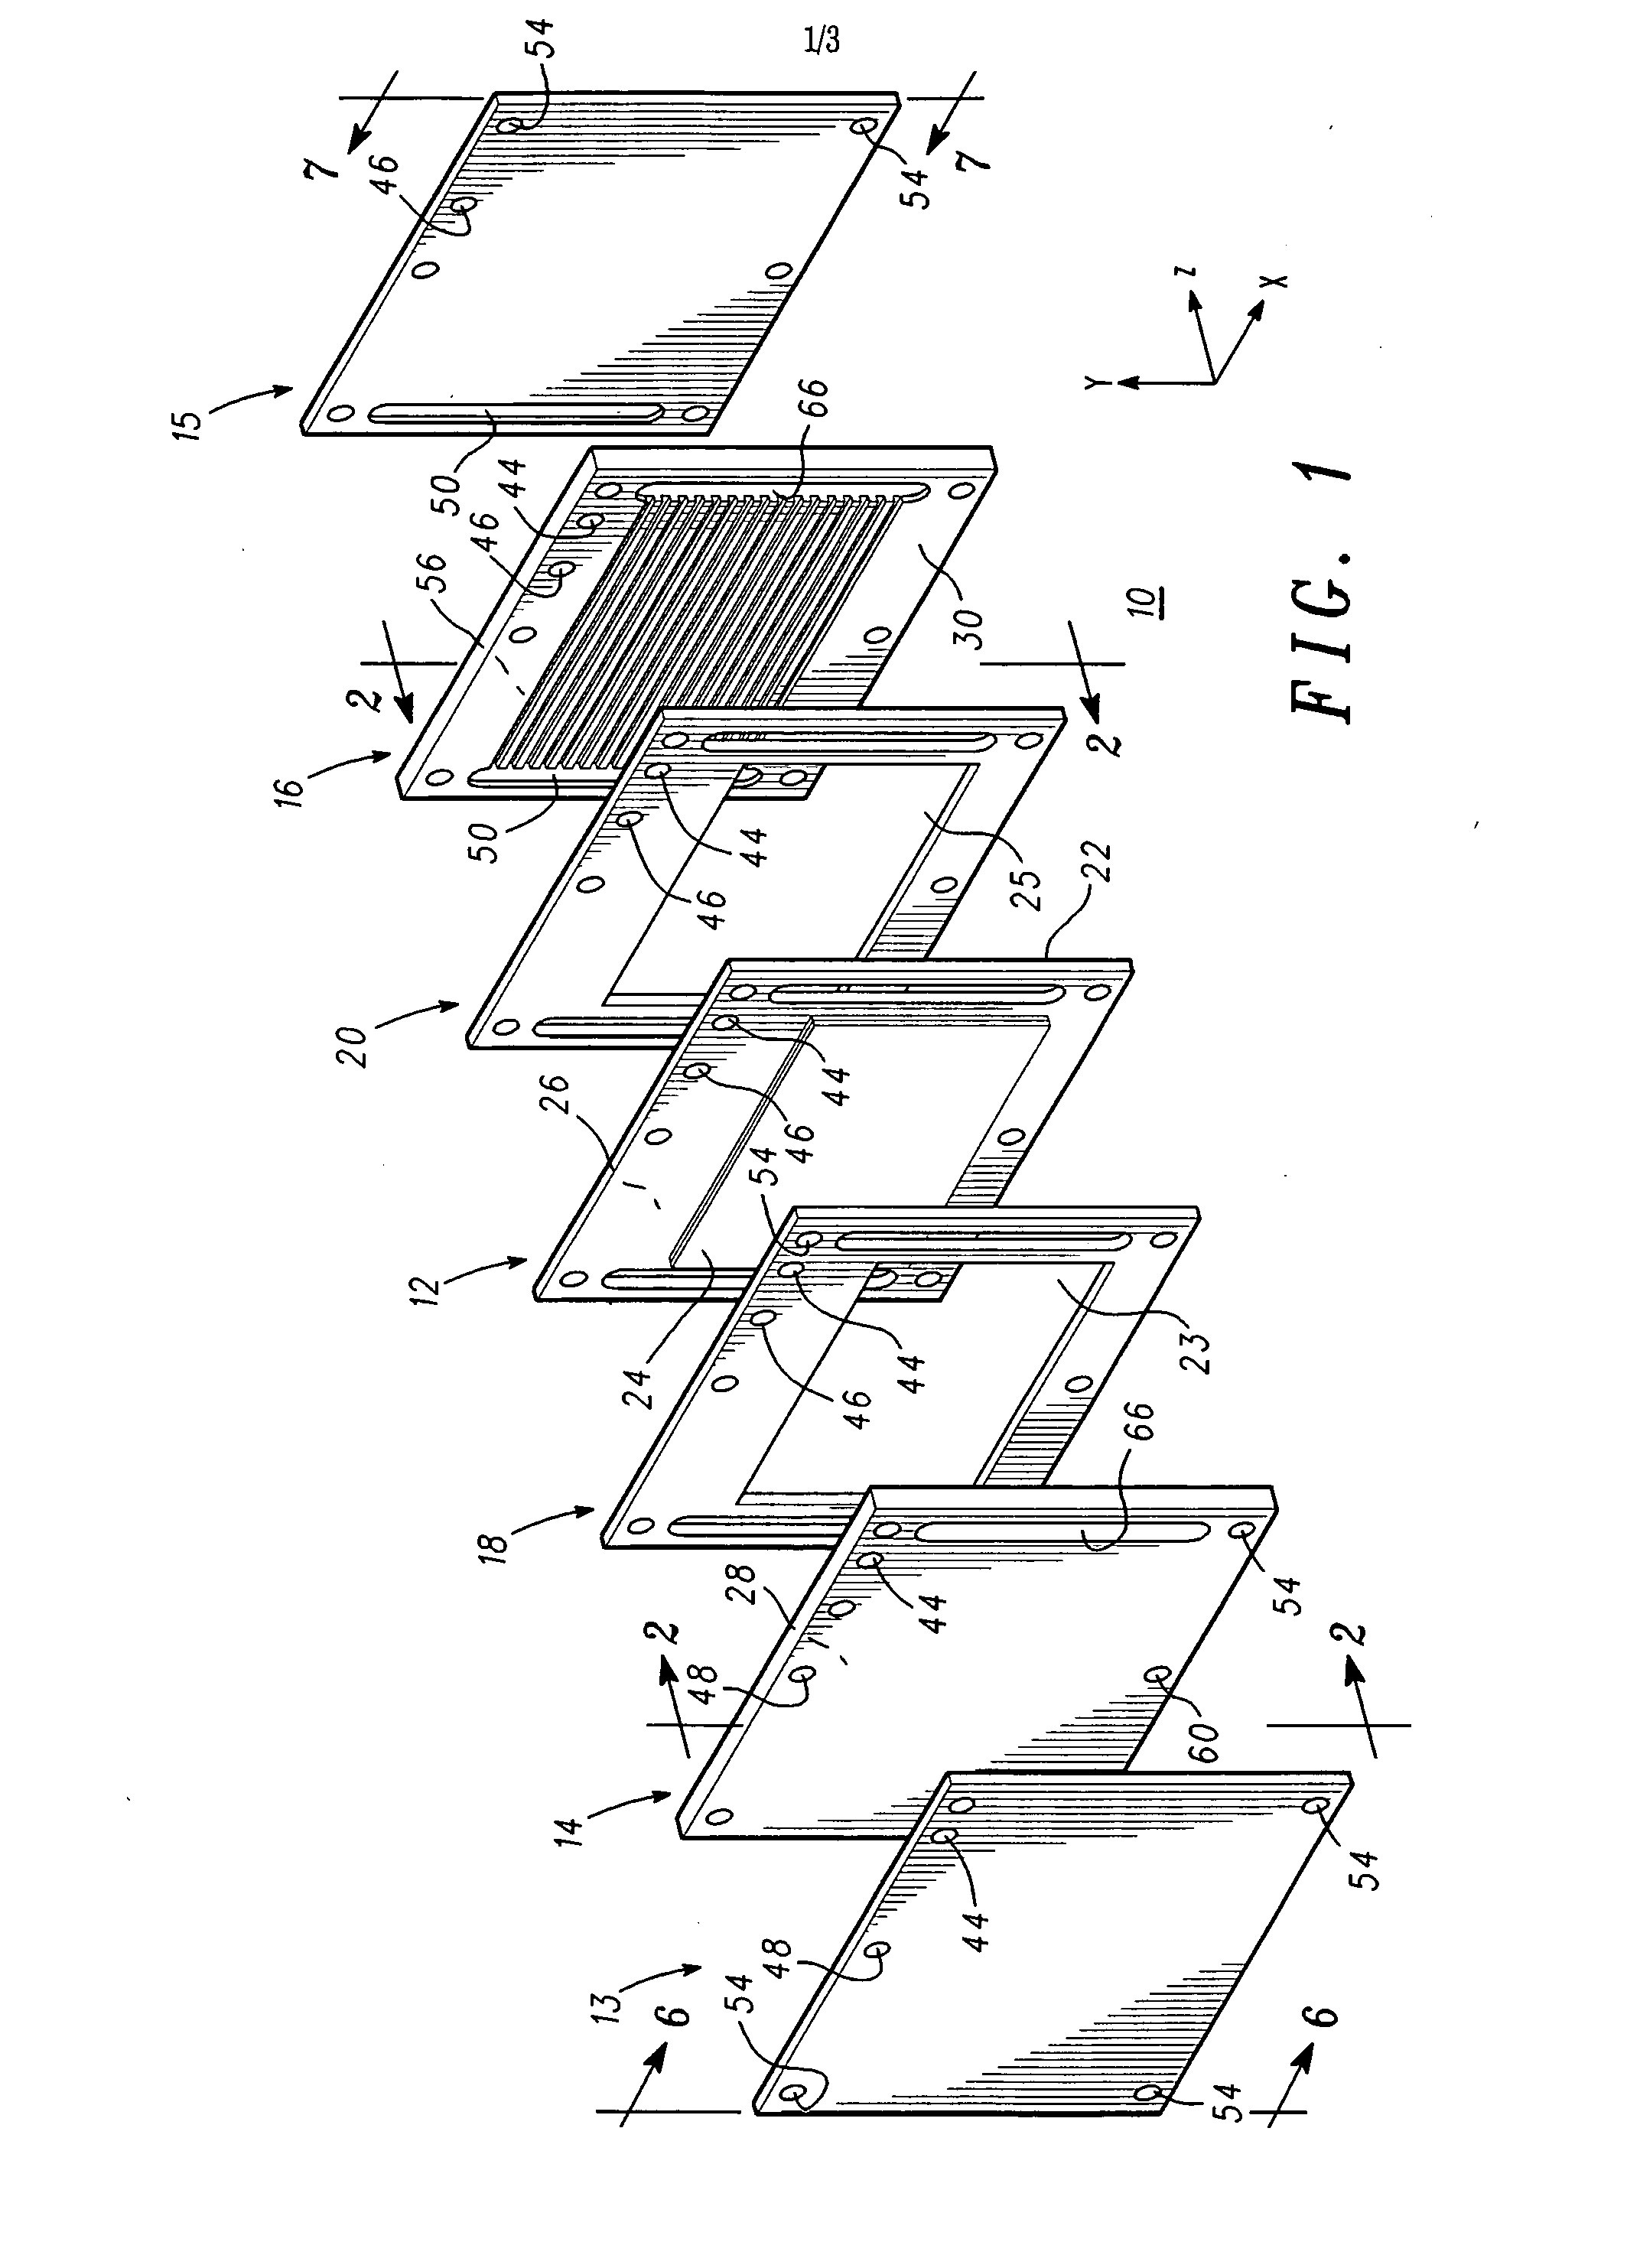 Polymer electrolyte membrane fuel cell stack